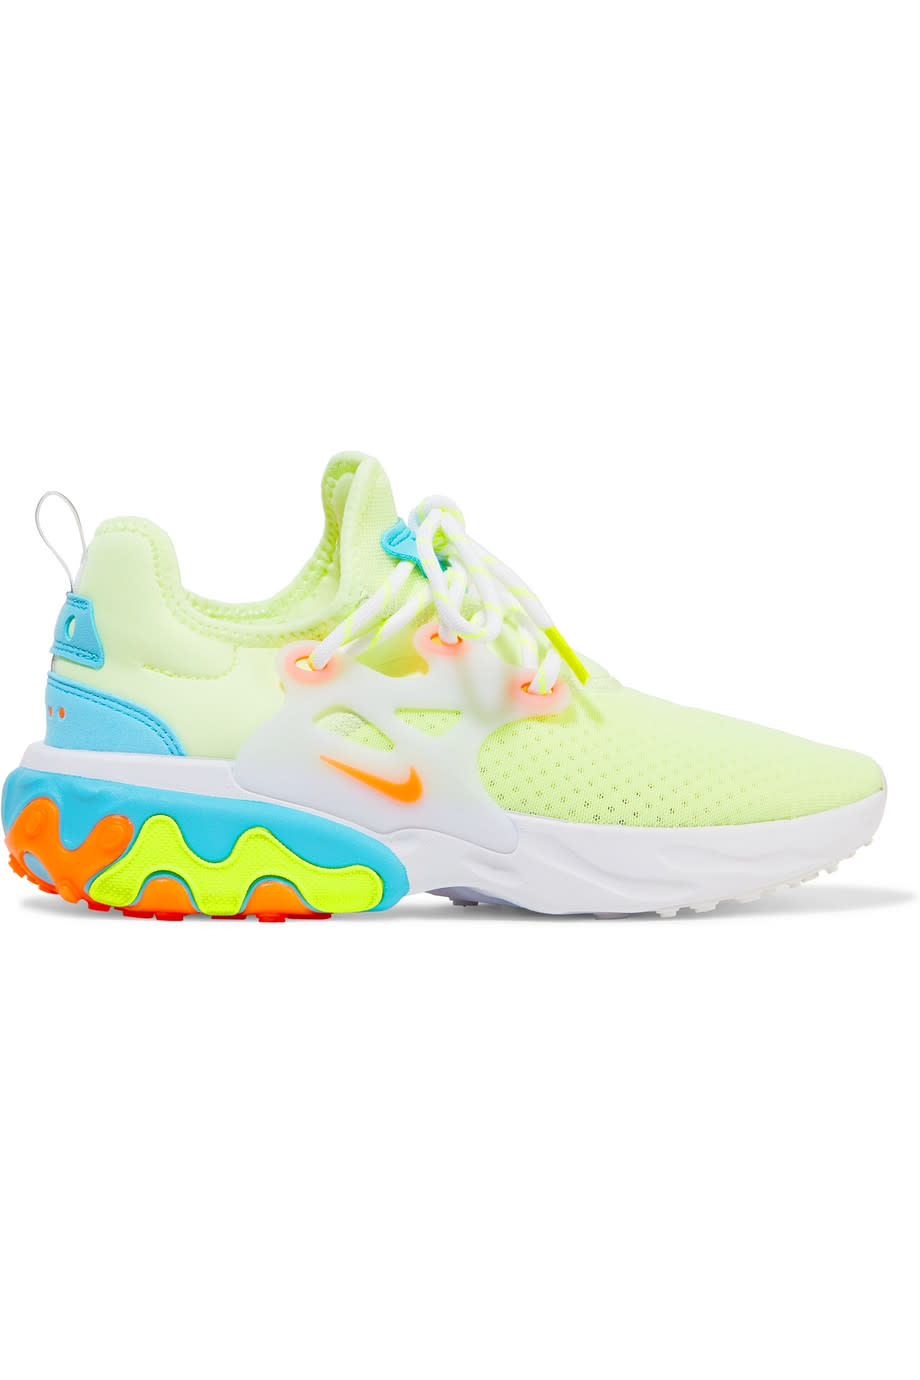 React Presto neon suede and rubber-trimmed mesh sneakers